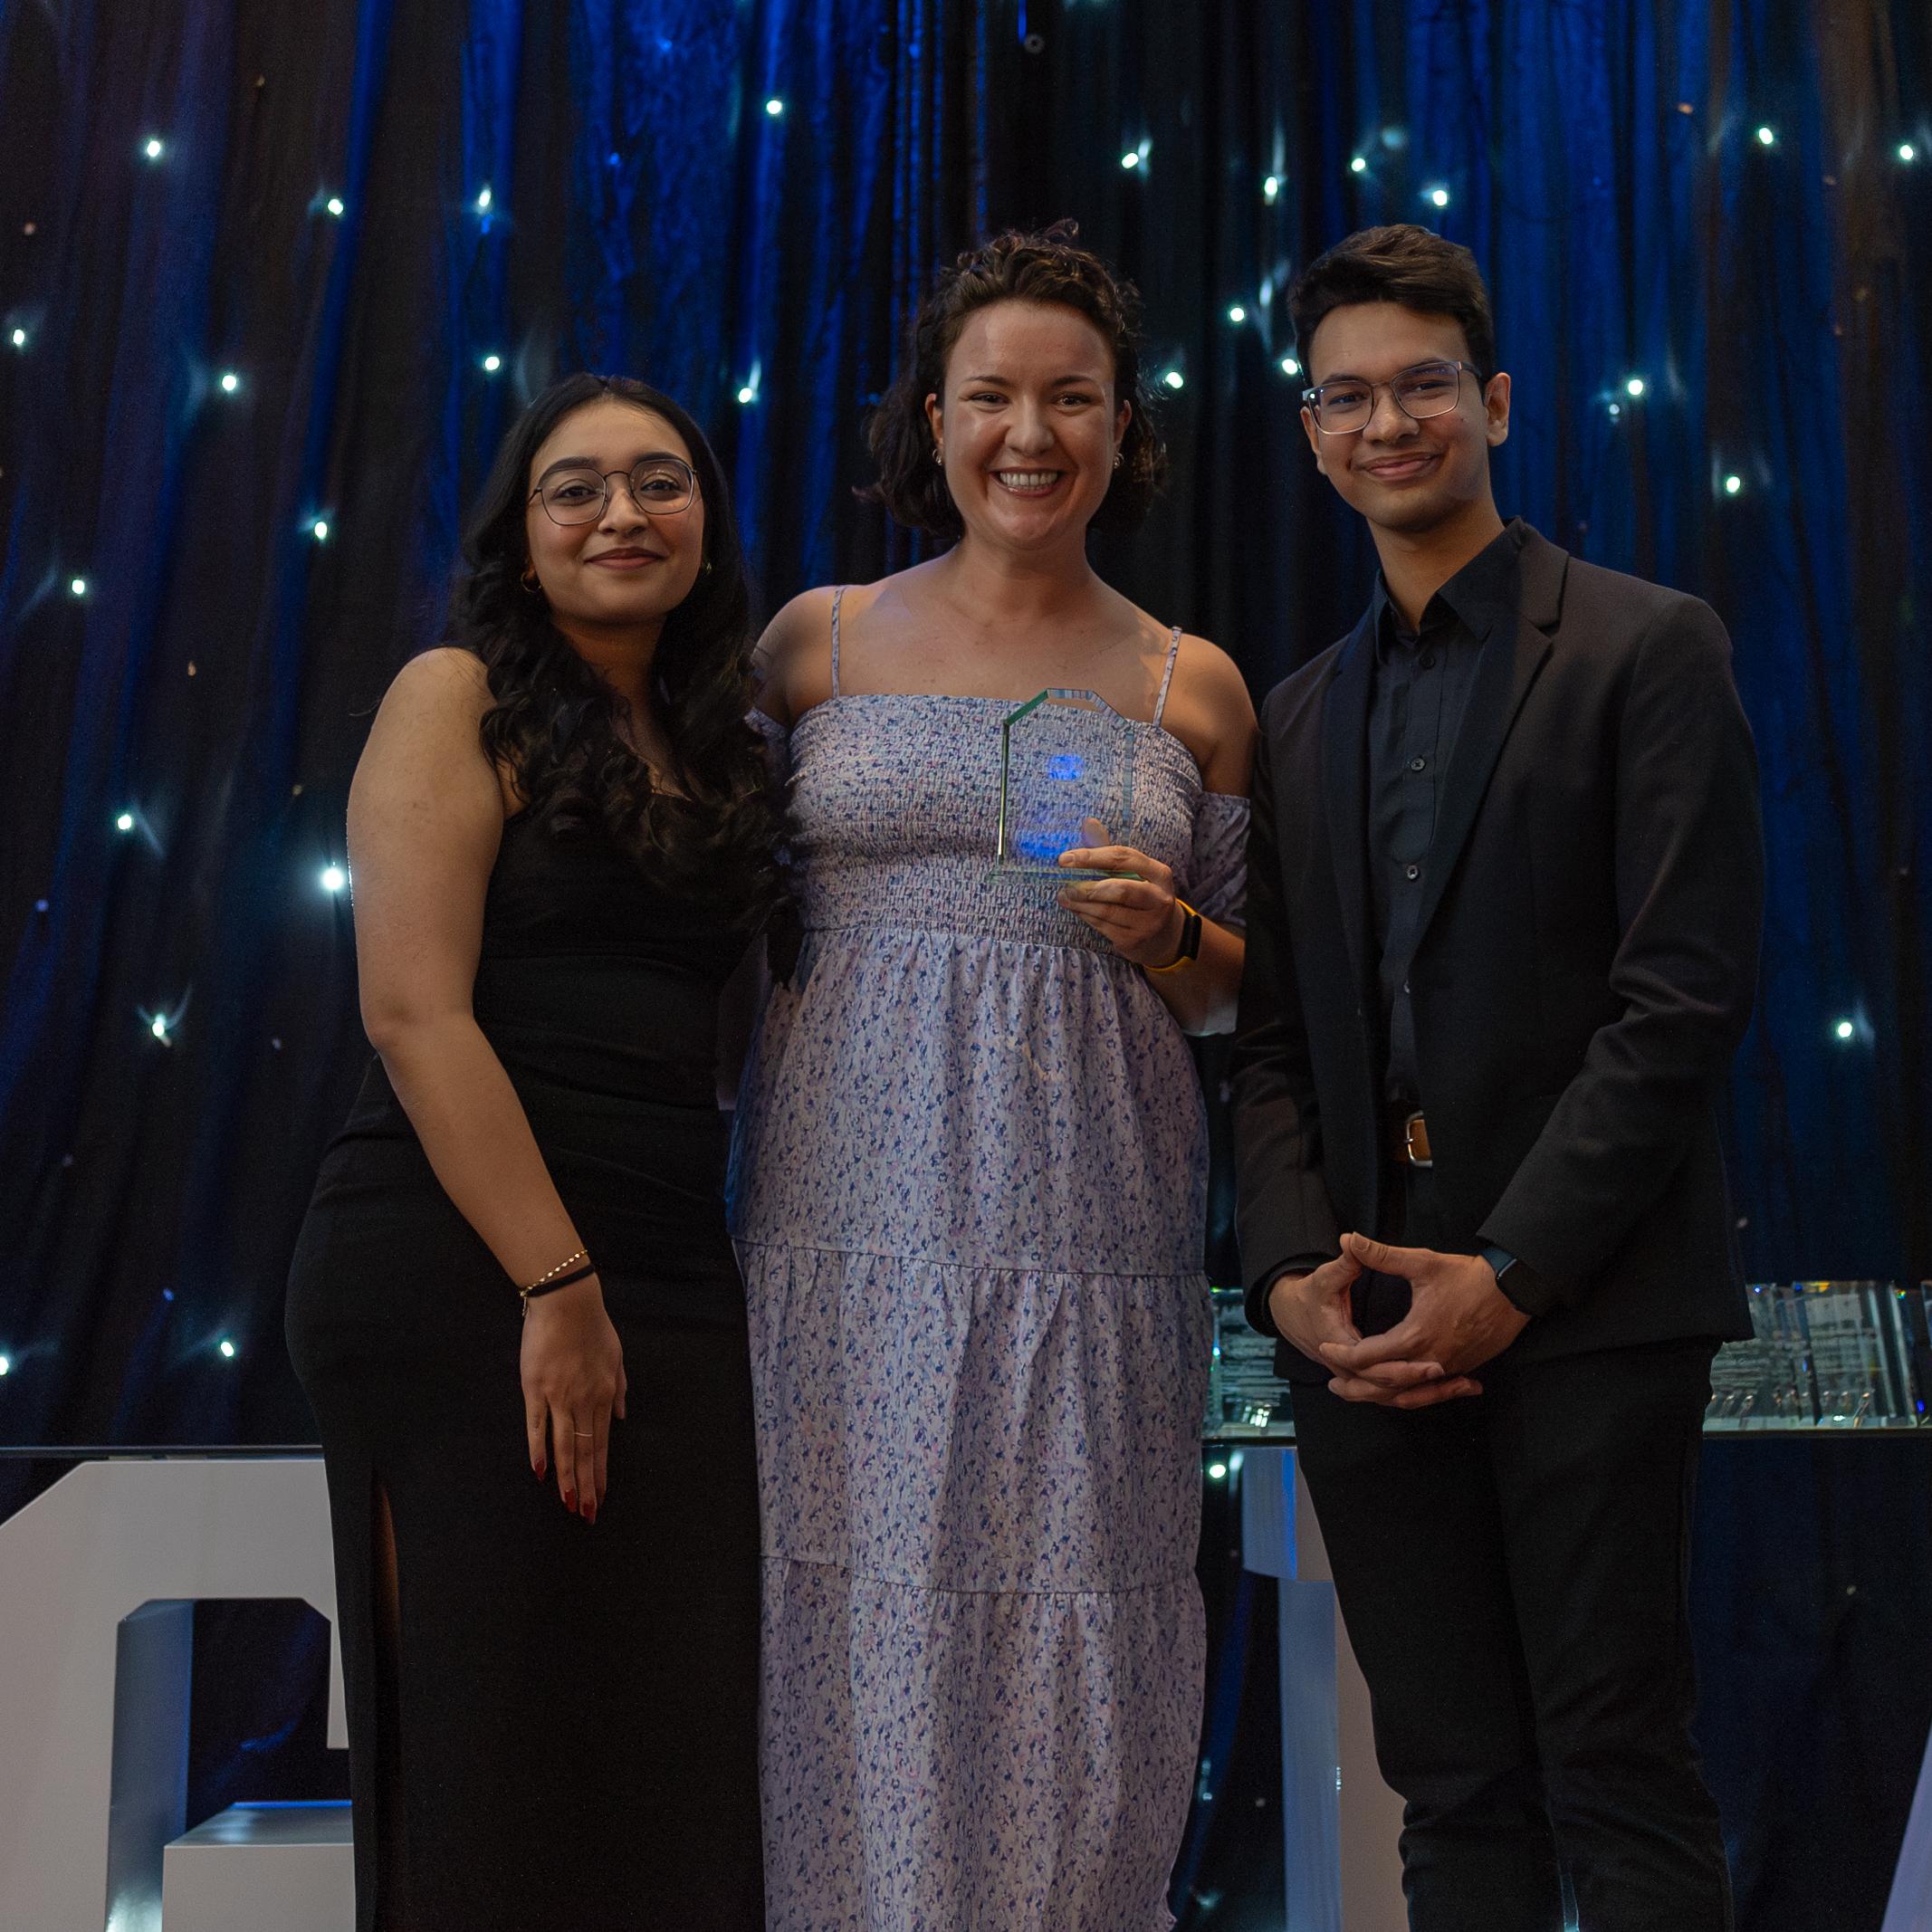 Maria Shibaeva-Escarraga smiles widely while being presented the Professor of the Year Award by two formally attired students during the U of T Scarborough Management Gala